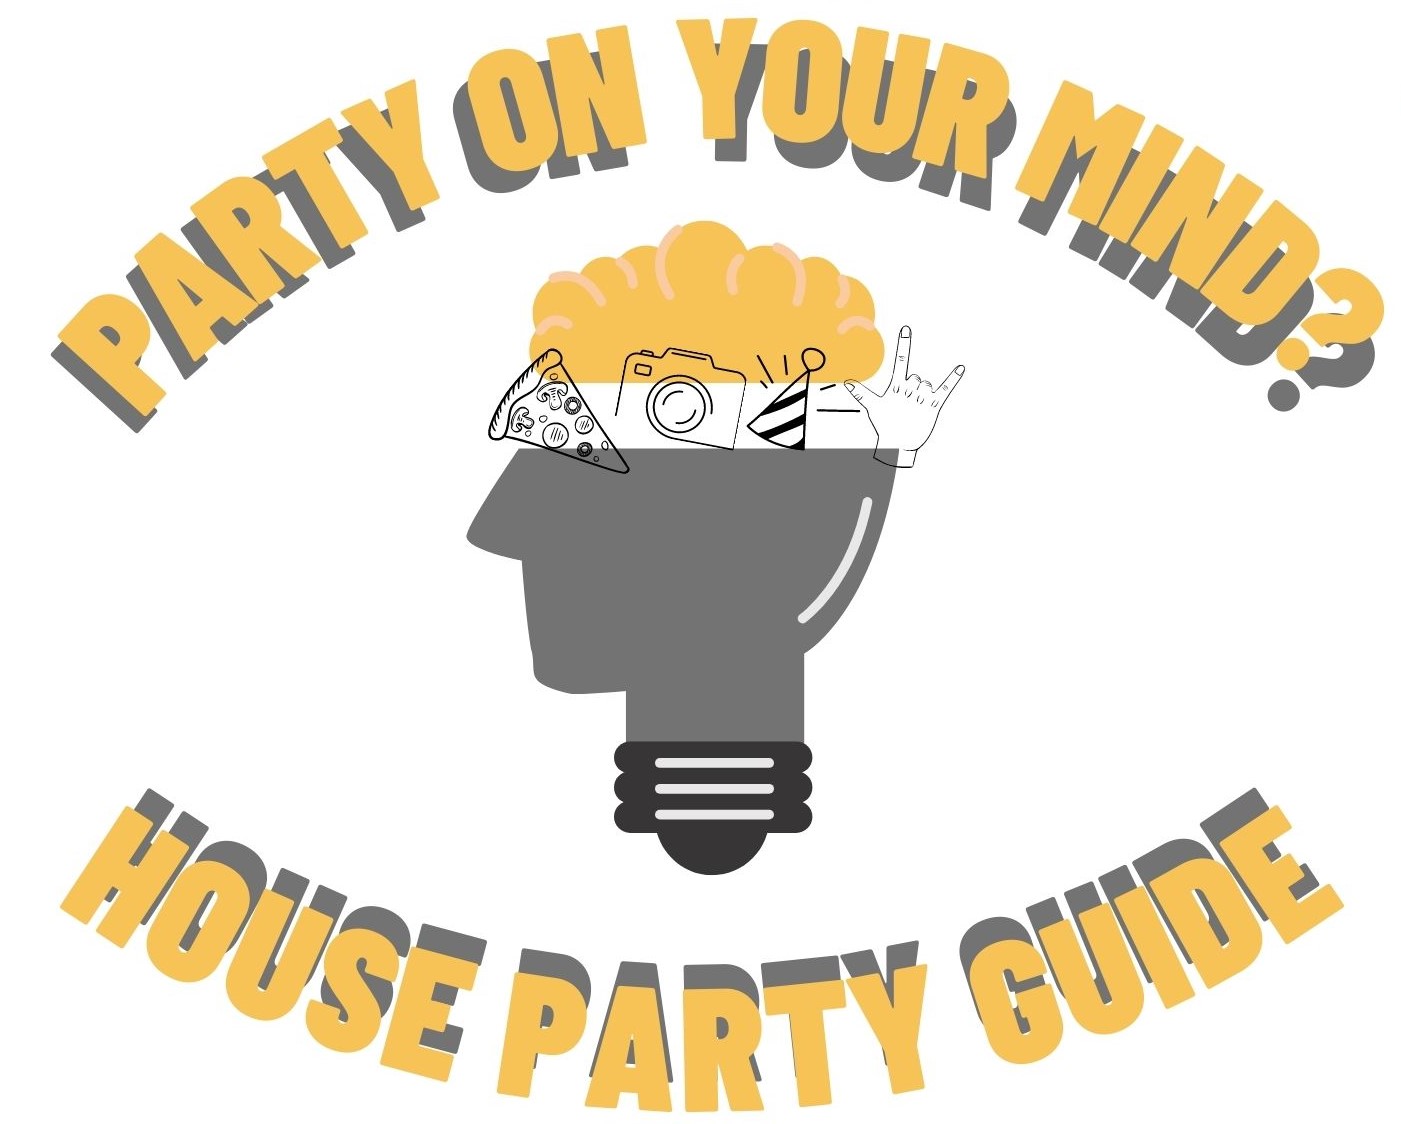 Image of the Party on Your Mind? house party guide